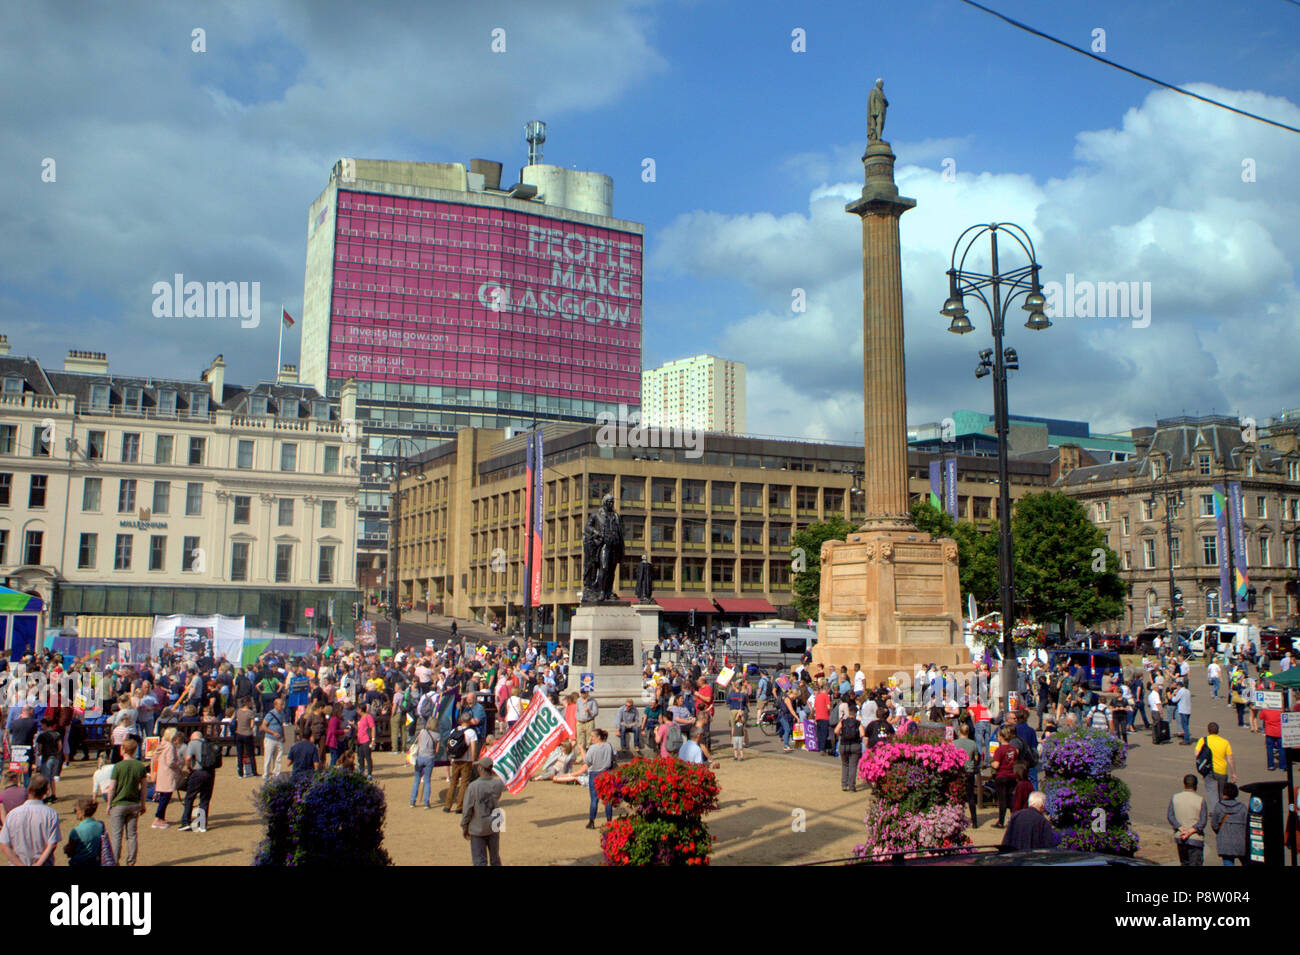 Glasgow, Scotland, UK 13th July.Donald Trump worldwide protest supported in George Square, the civic and administrative centre of the city.Organized by Scotland Against Trump it was expected to attract 5000 supporters. Gerard Ferry/Alamy news Stock Photo